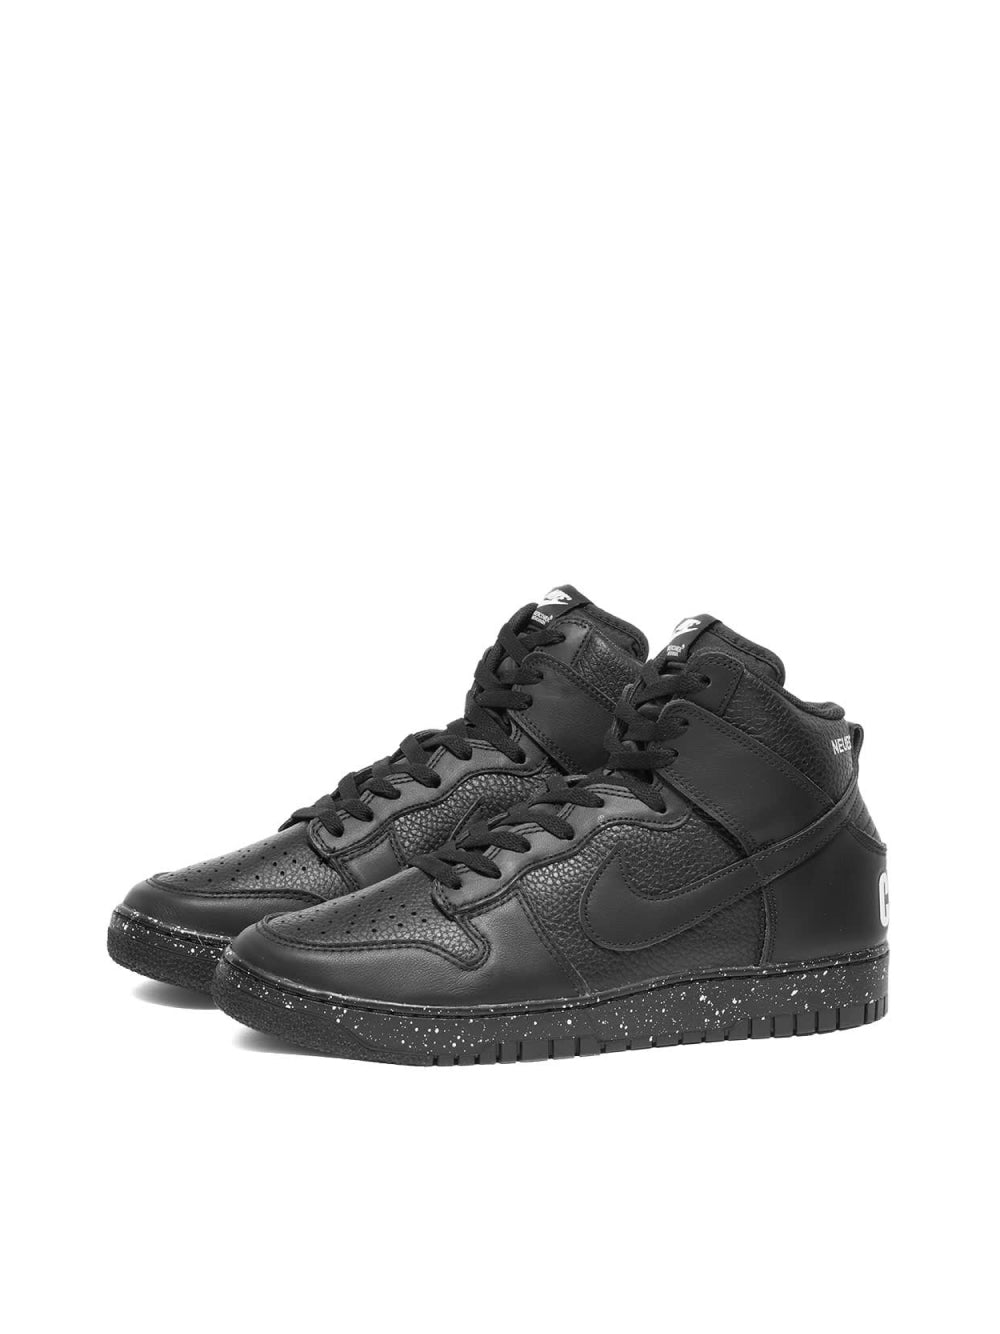 Nike-OUTLET-SALE-Nike Dunk Hi 1985 x Undercover Sneakers-ARCHIVIST